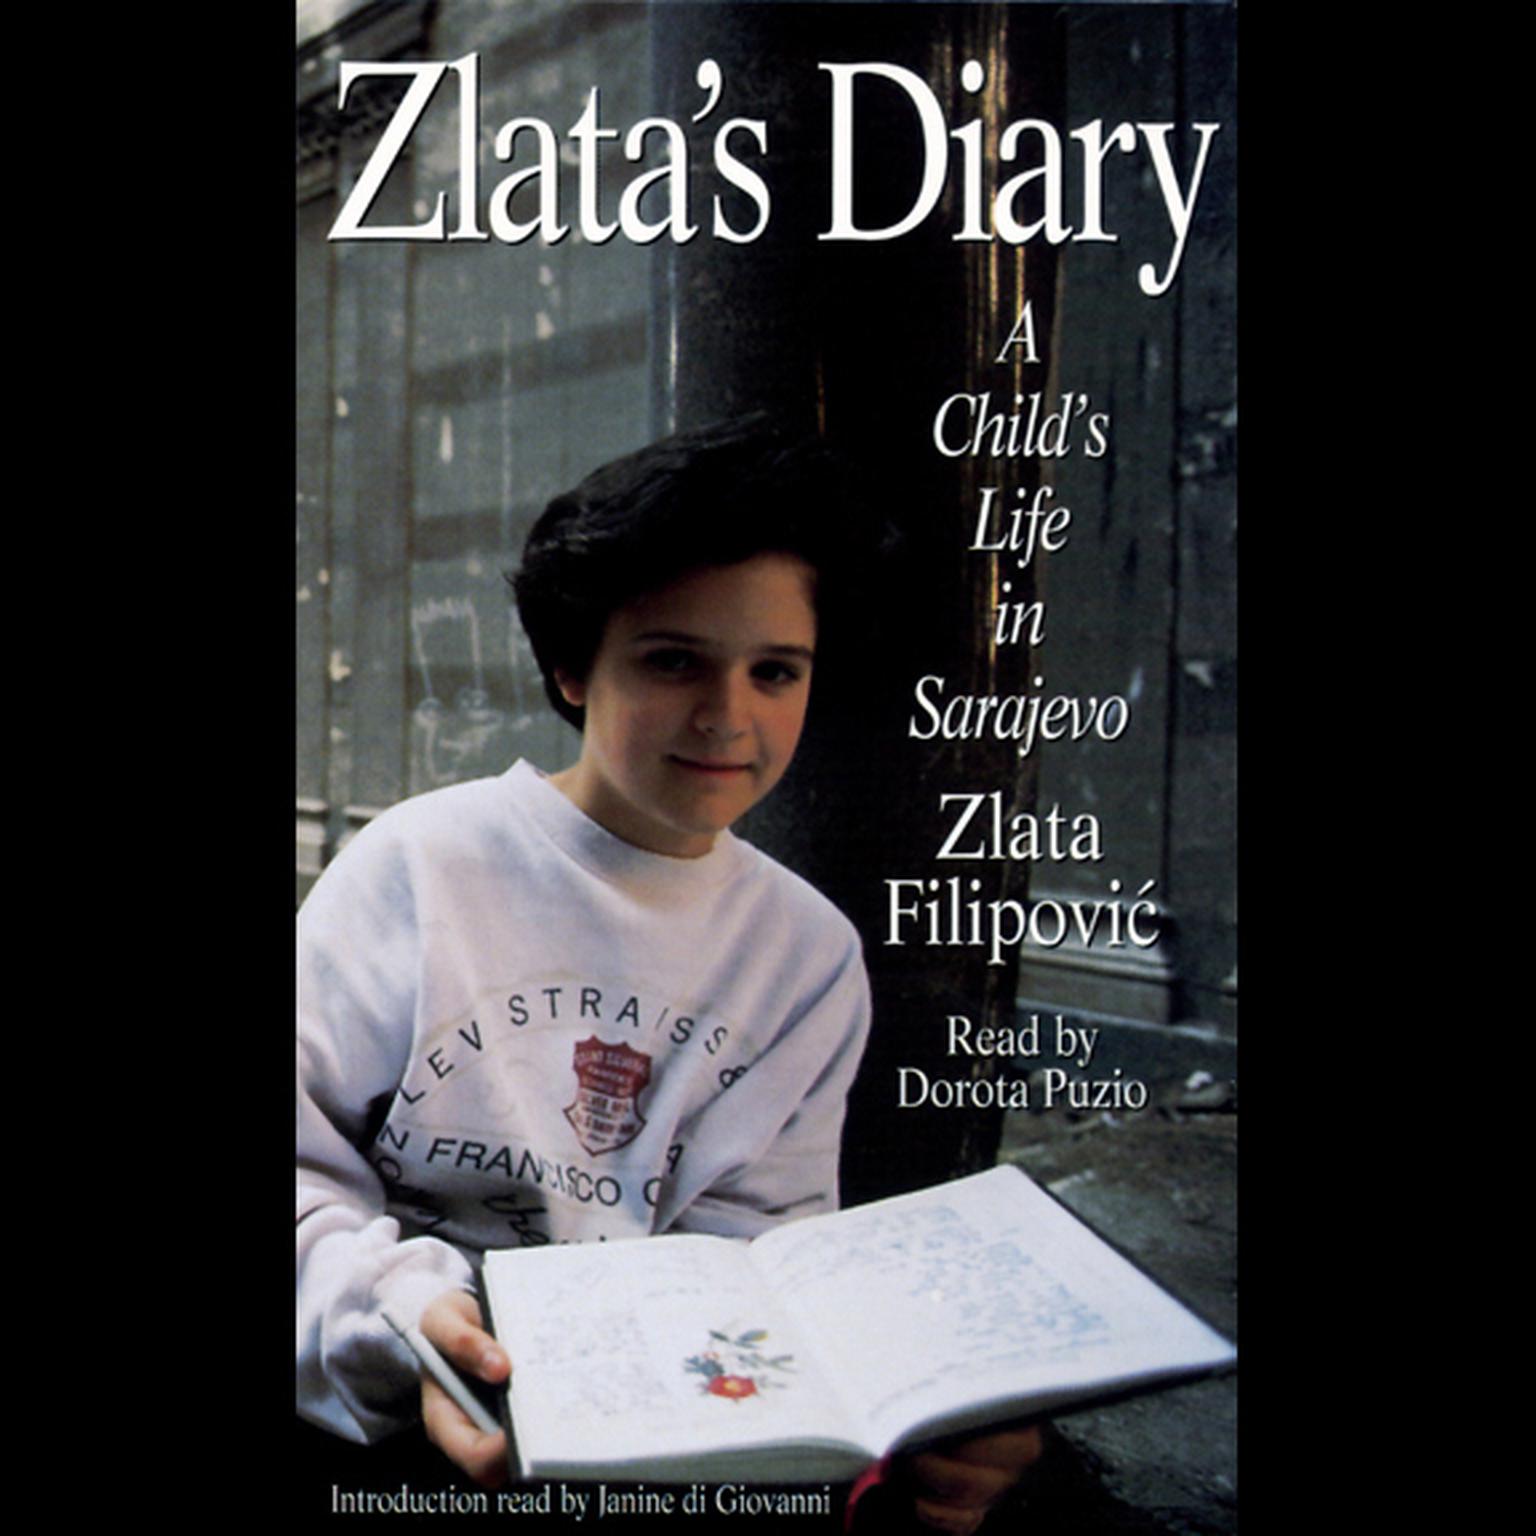 Zlatas Diary (Abridged): A Childs Life in Wartime Sarajevo: Revised Edition Audiobook, by Zlata Filipovic